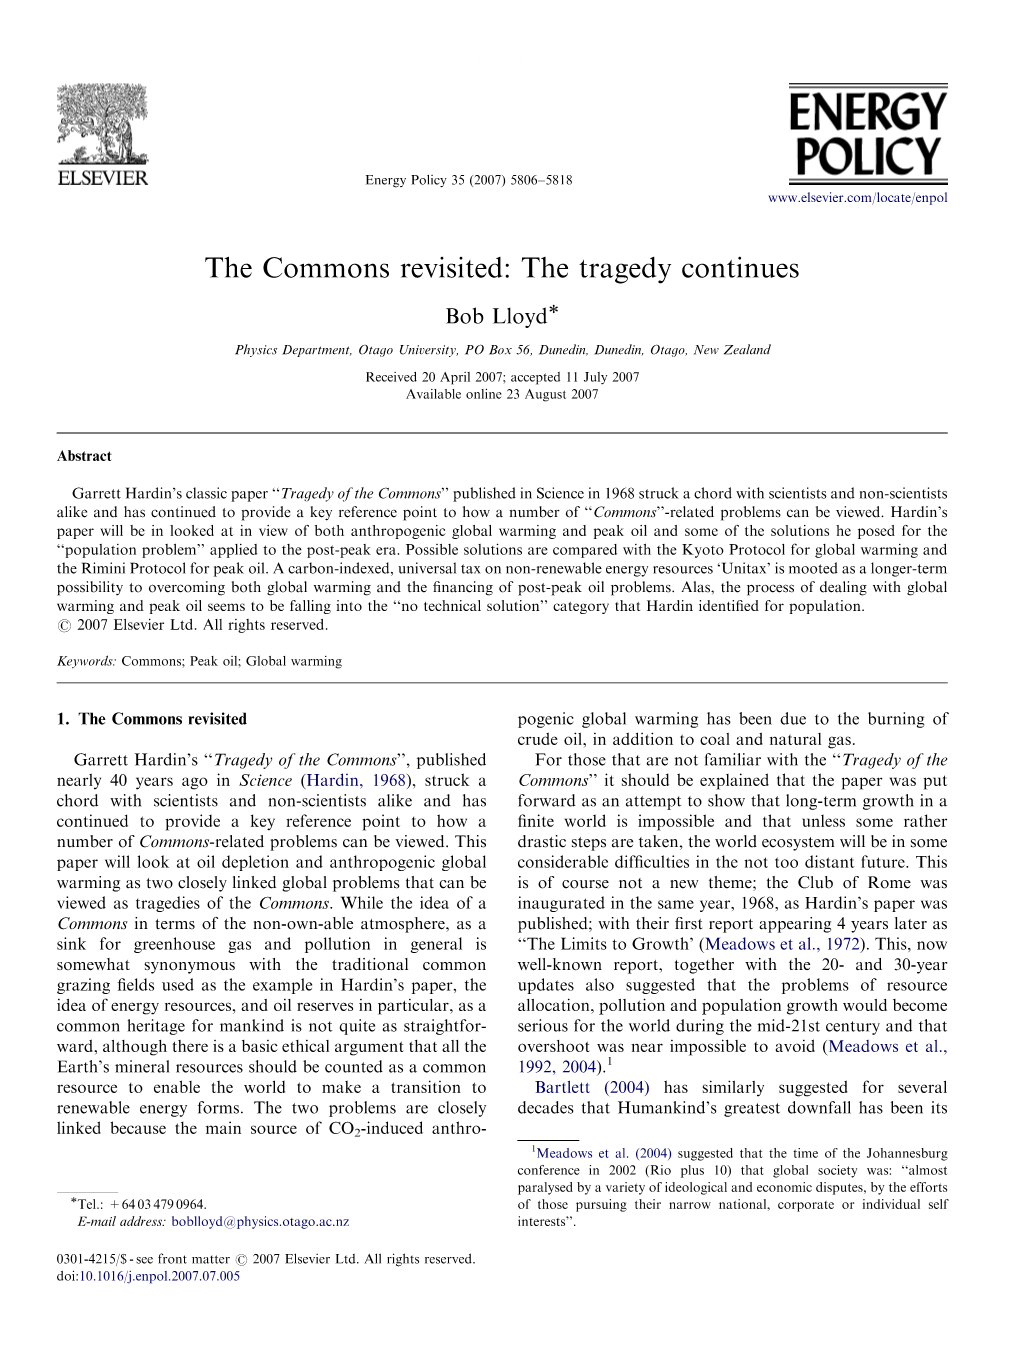 The Commons Revisited: the Tragedy Continues